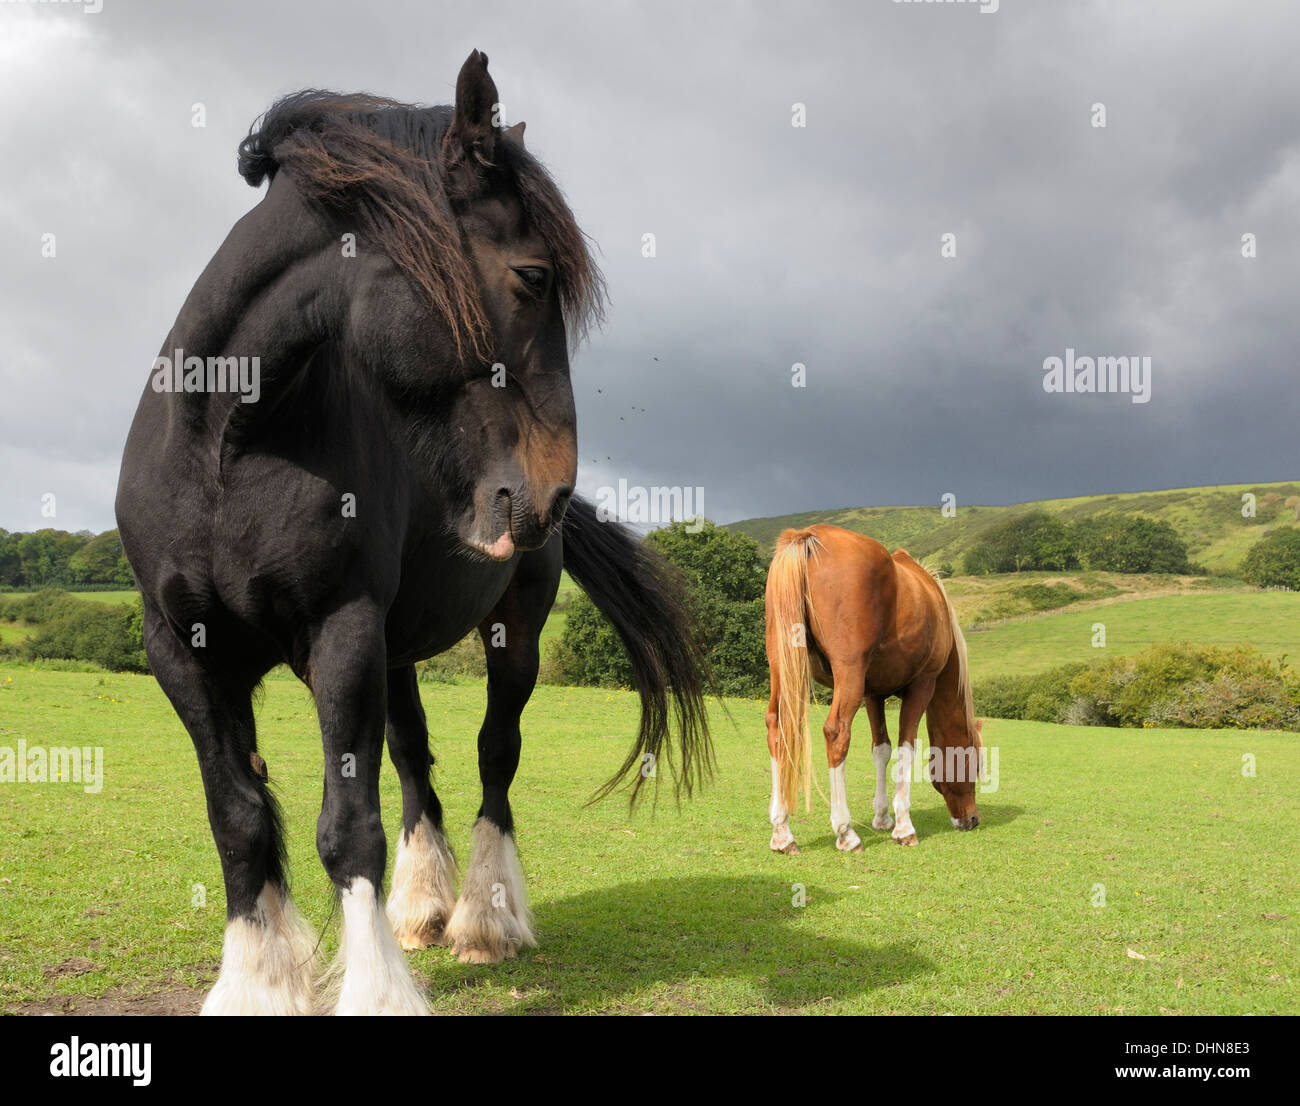 Two horses in a field in the Dorset countryside. Stock Photo